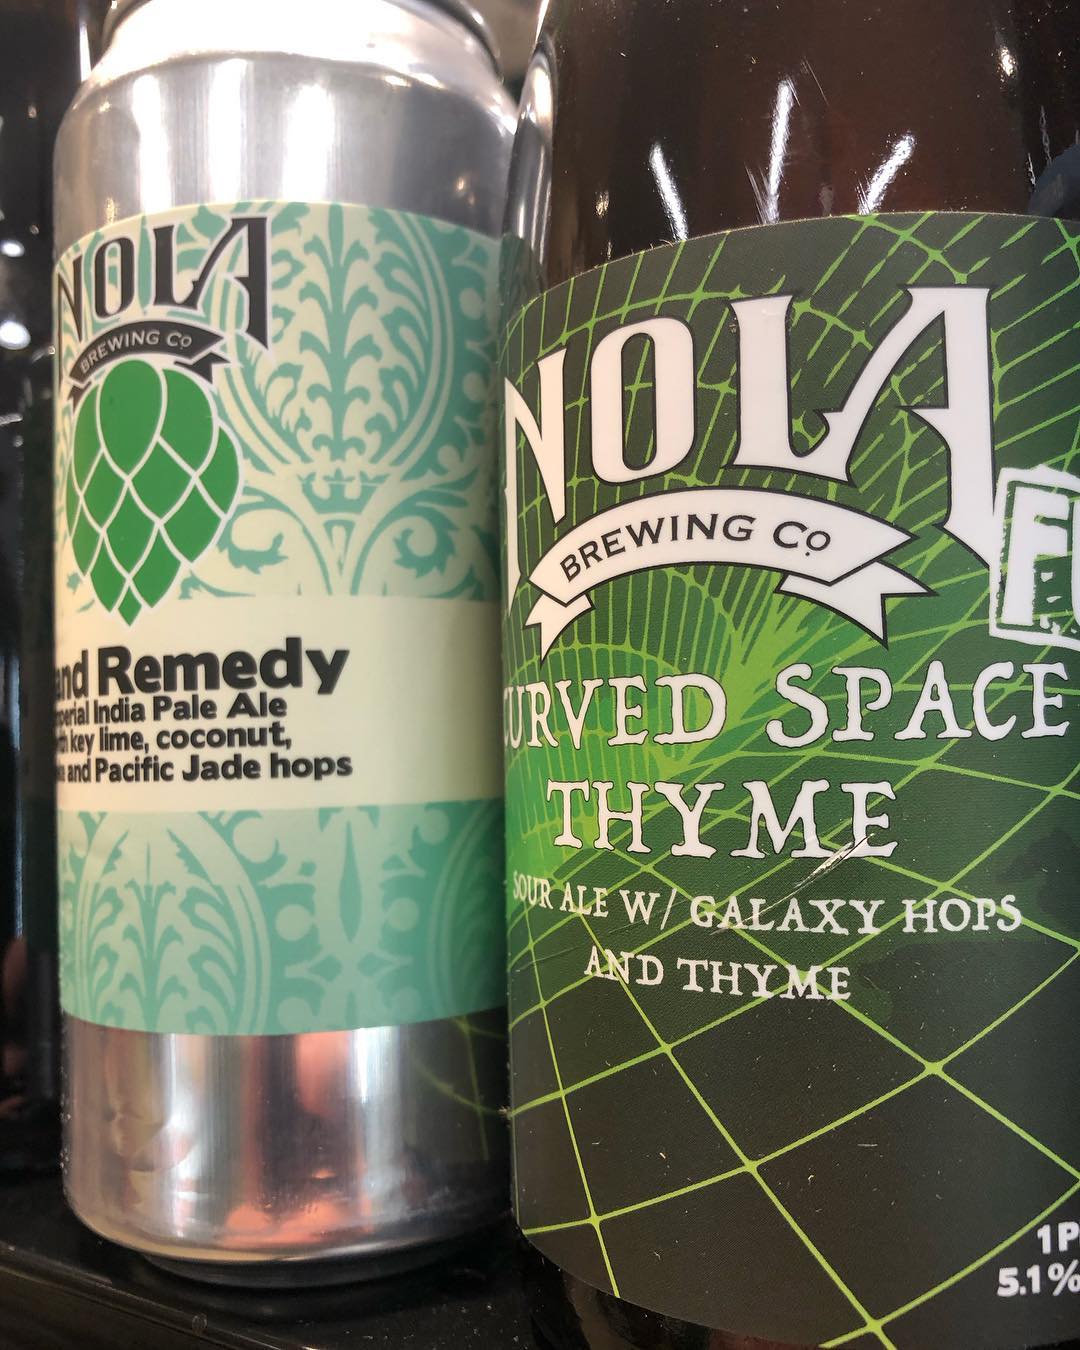 @nolabrewing Curved Space Thyme is now in stock, as well as another small drop of…